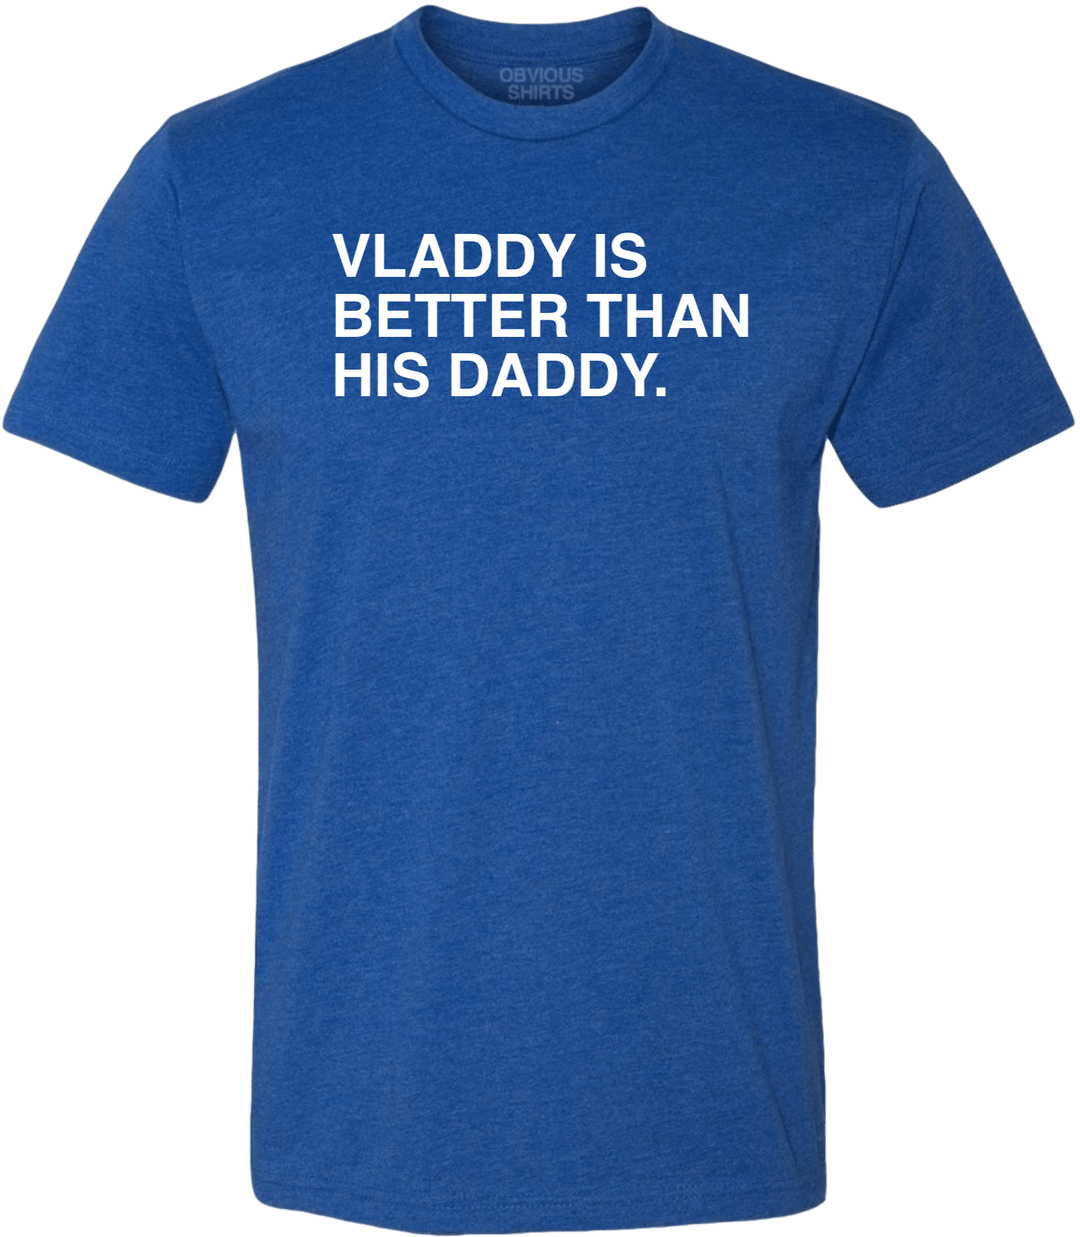 VLADDY IS BETTER THAN HIS DADDY. - OBVIOUS SHIRTS